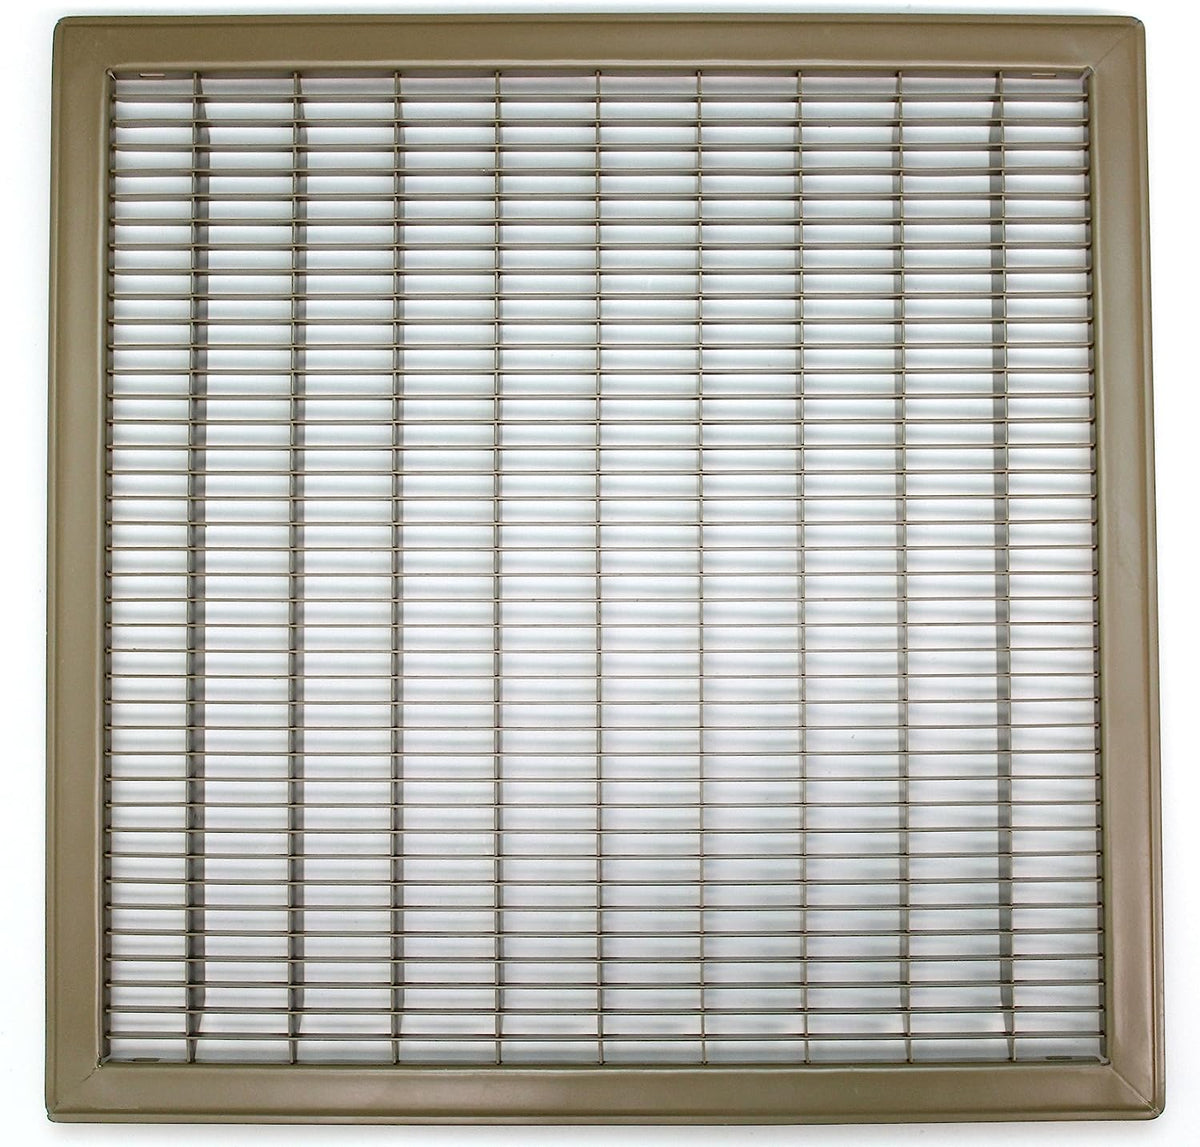 20&quot; X 20&quot; Heavy Duty Floor Grille - Fixed Blades Air Grille - Brown [Outer Dimensions: 21.75 X 21.75]